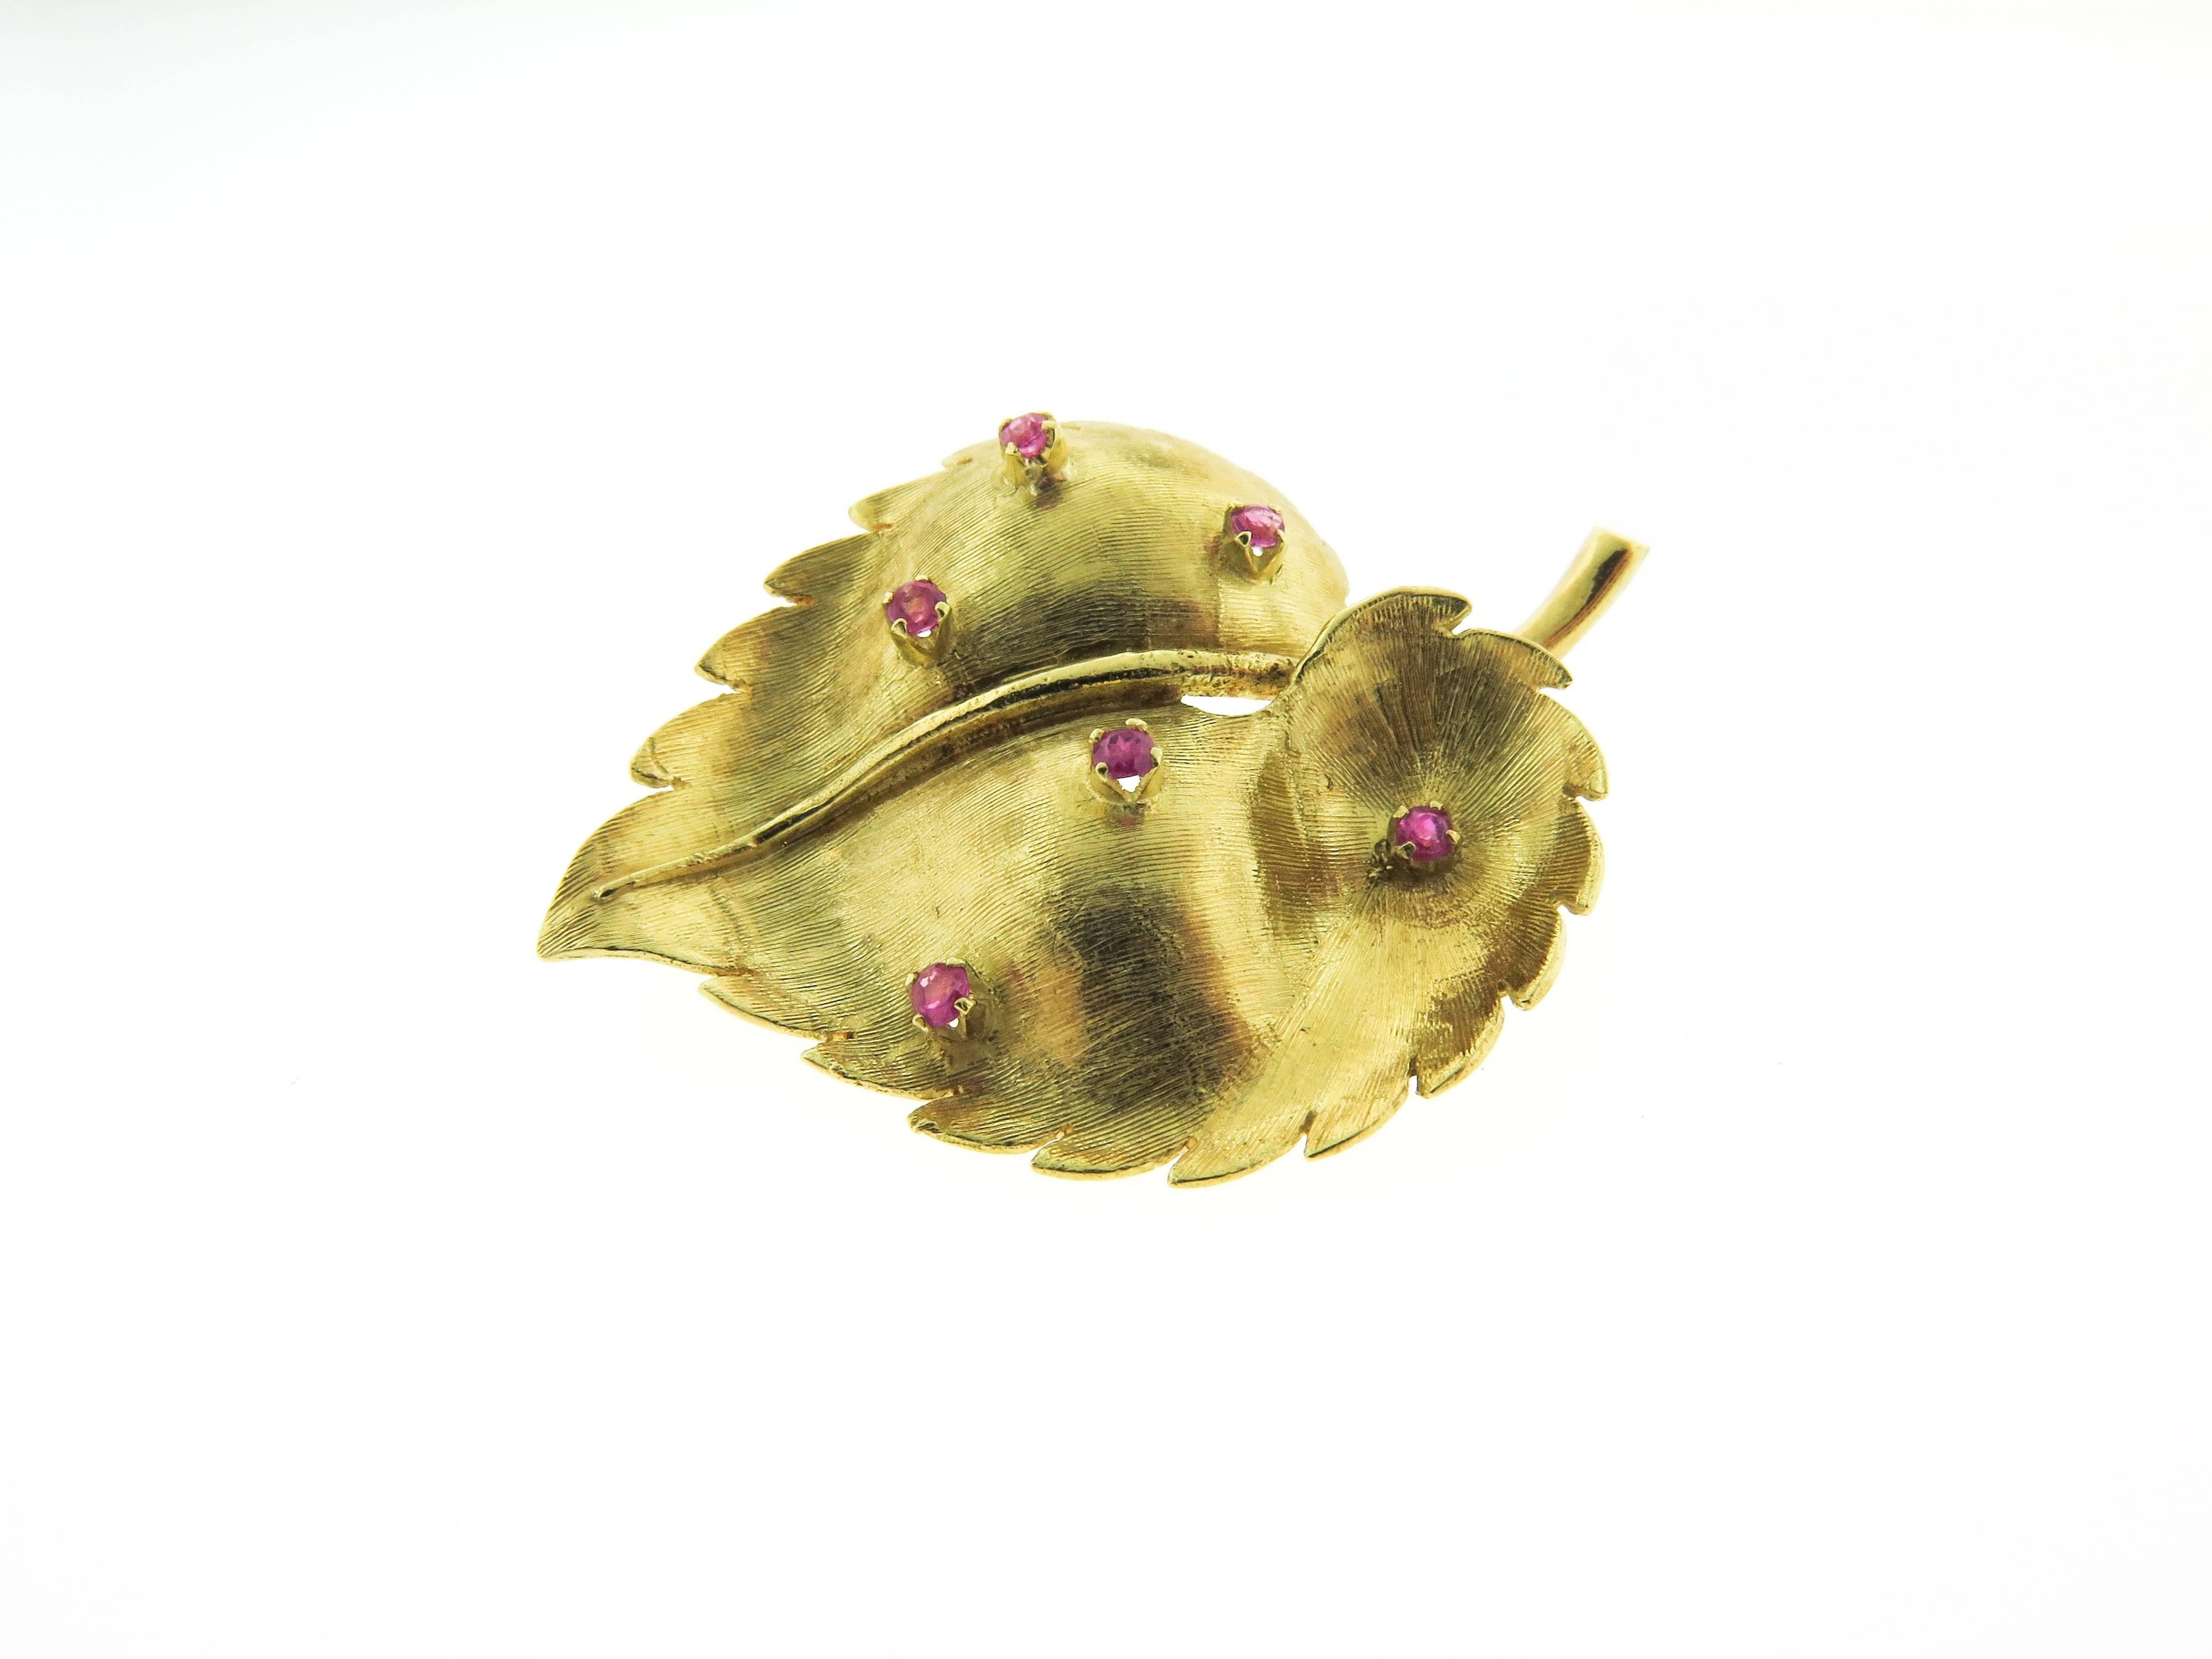 A vintage brooch in the form of a leaf, set with 6 round cut rubies and mounted in 18K gold, circa 1960. Measures approximately 39 x 29mm. Beautifully designed with satin finished details. 